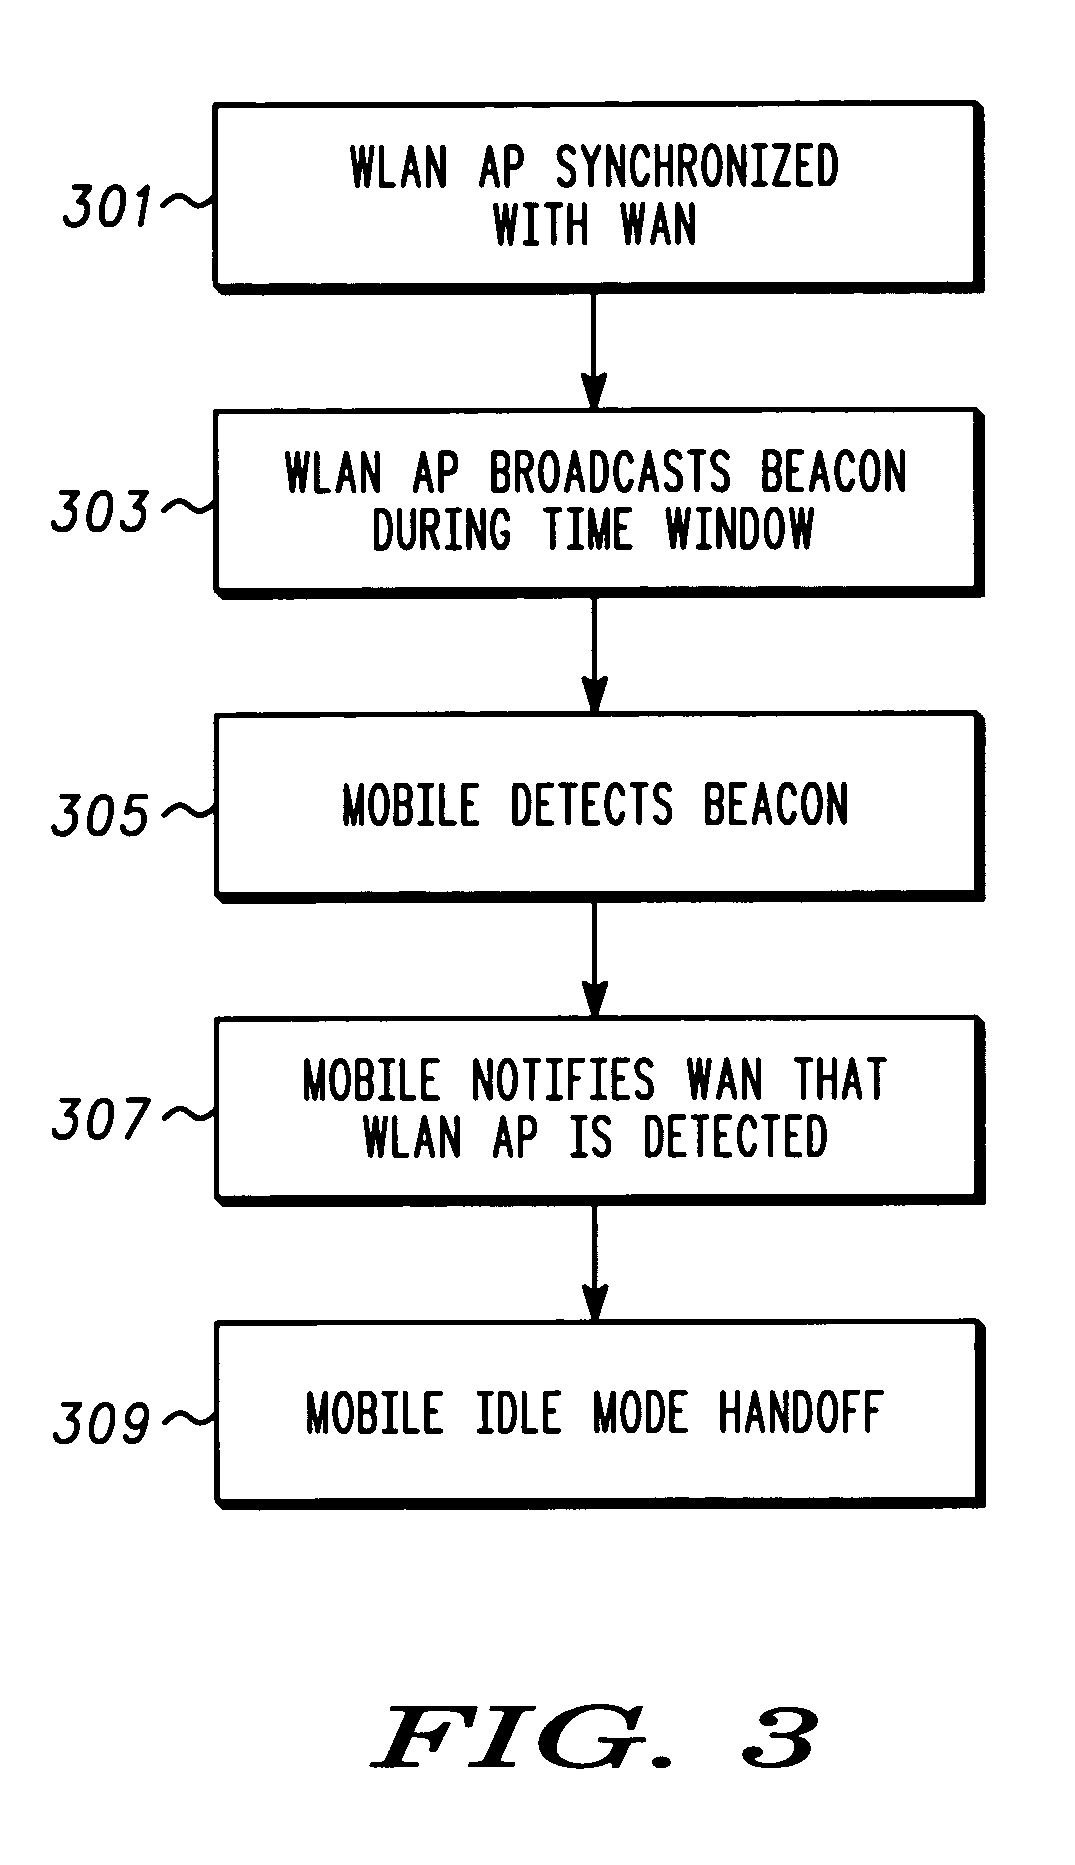 Mechanism for hand off using access point detection of synchronized subscriber beacon transmissions